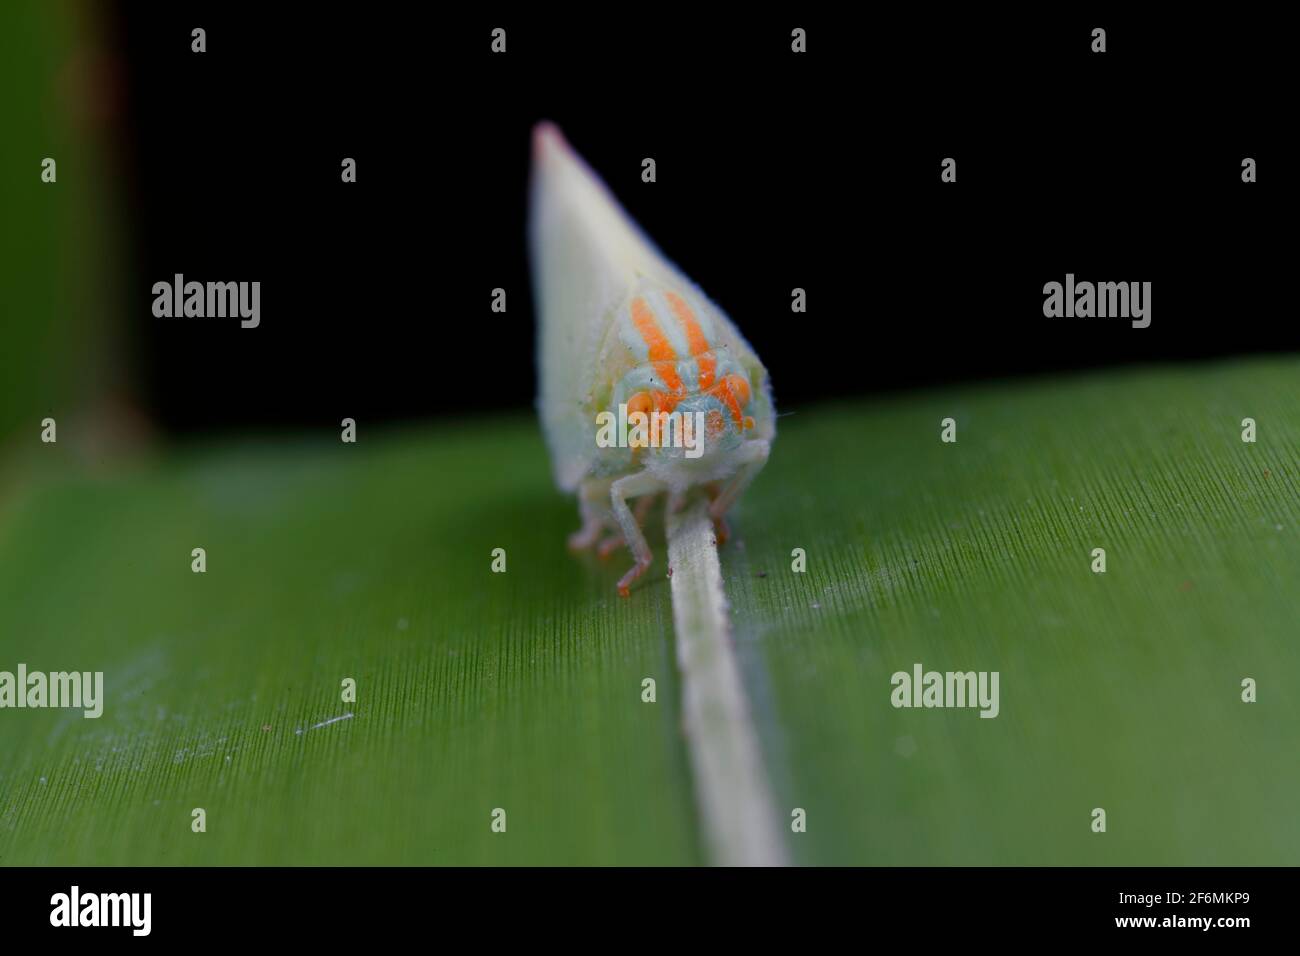 Palmetto leaf hoppers facing the camera. Stock Photo